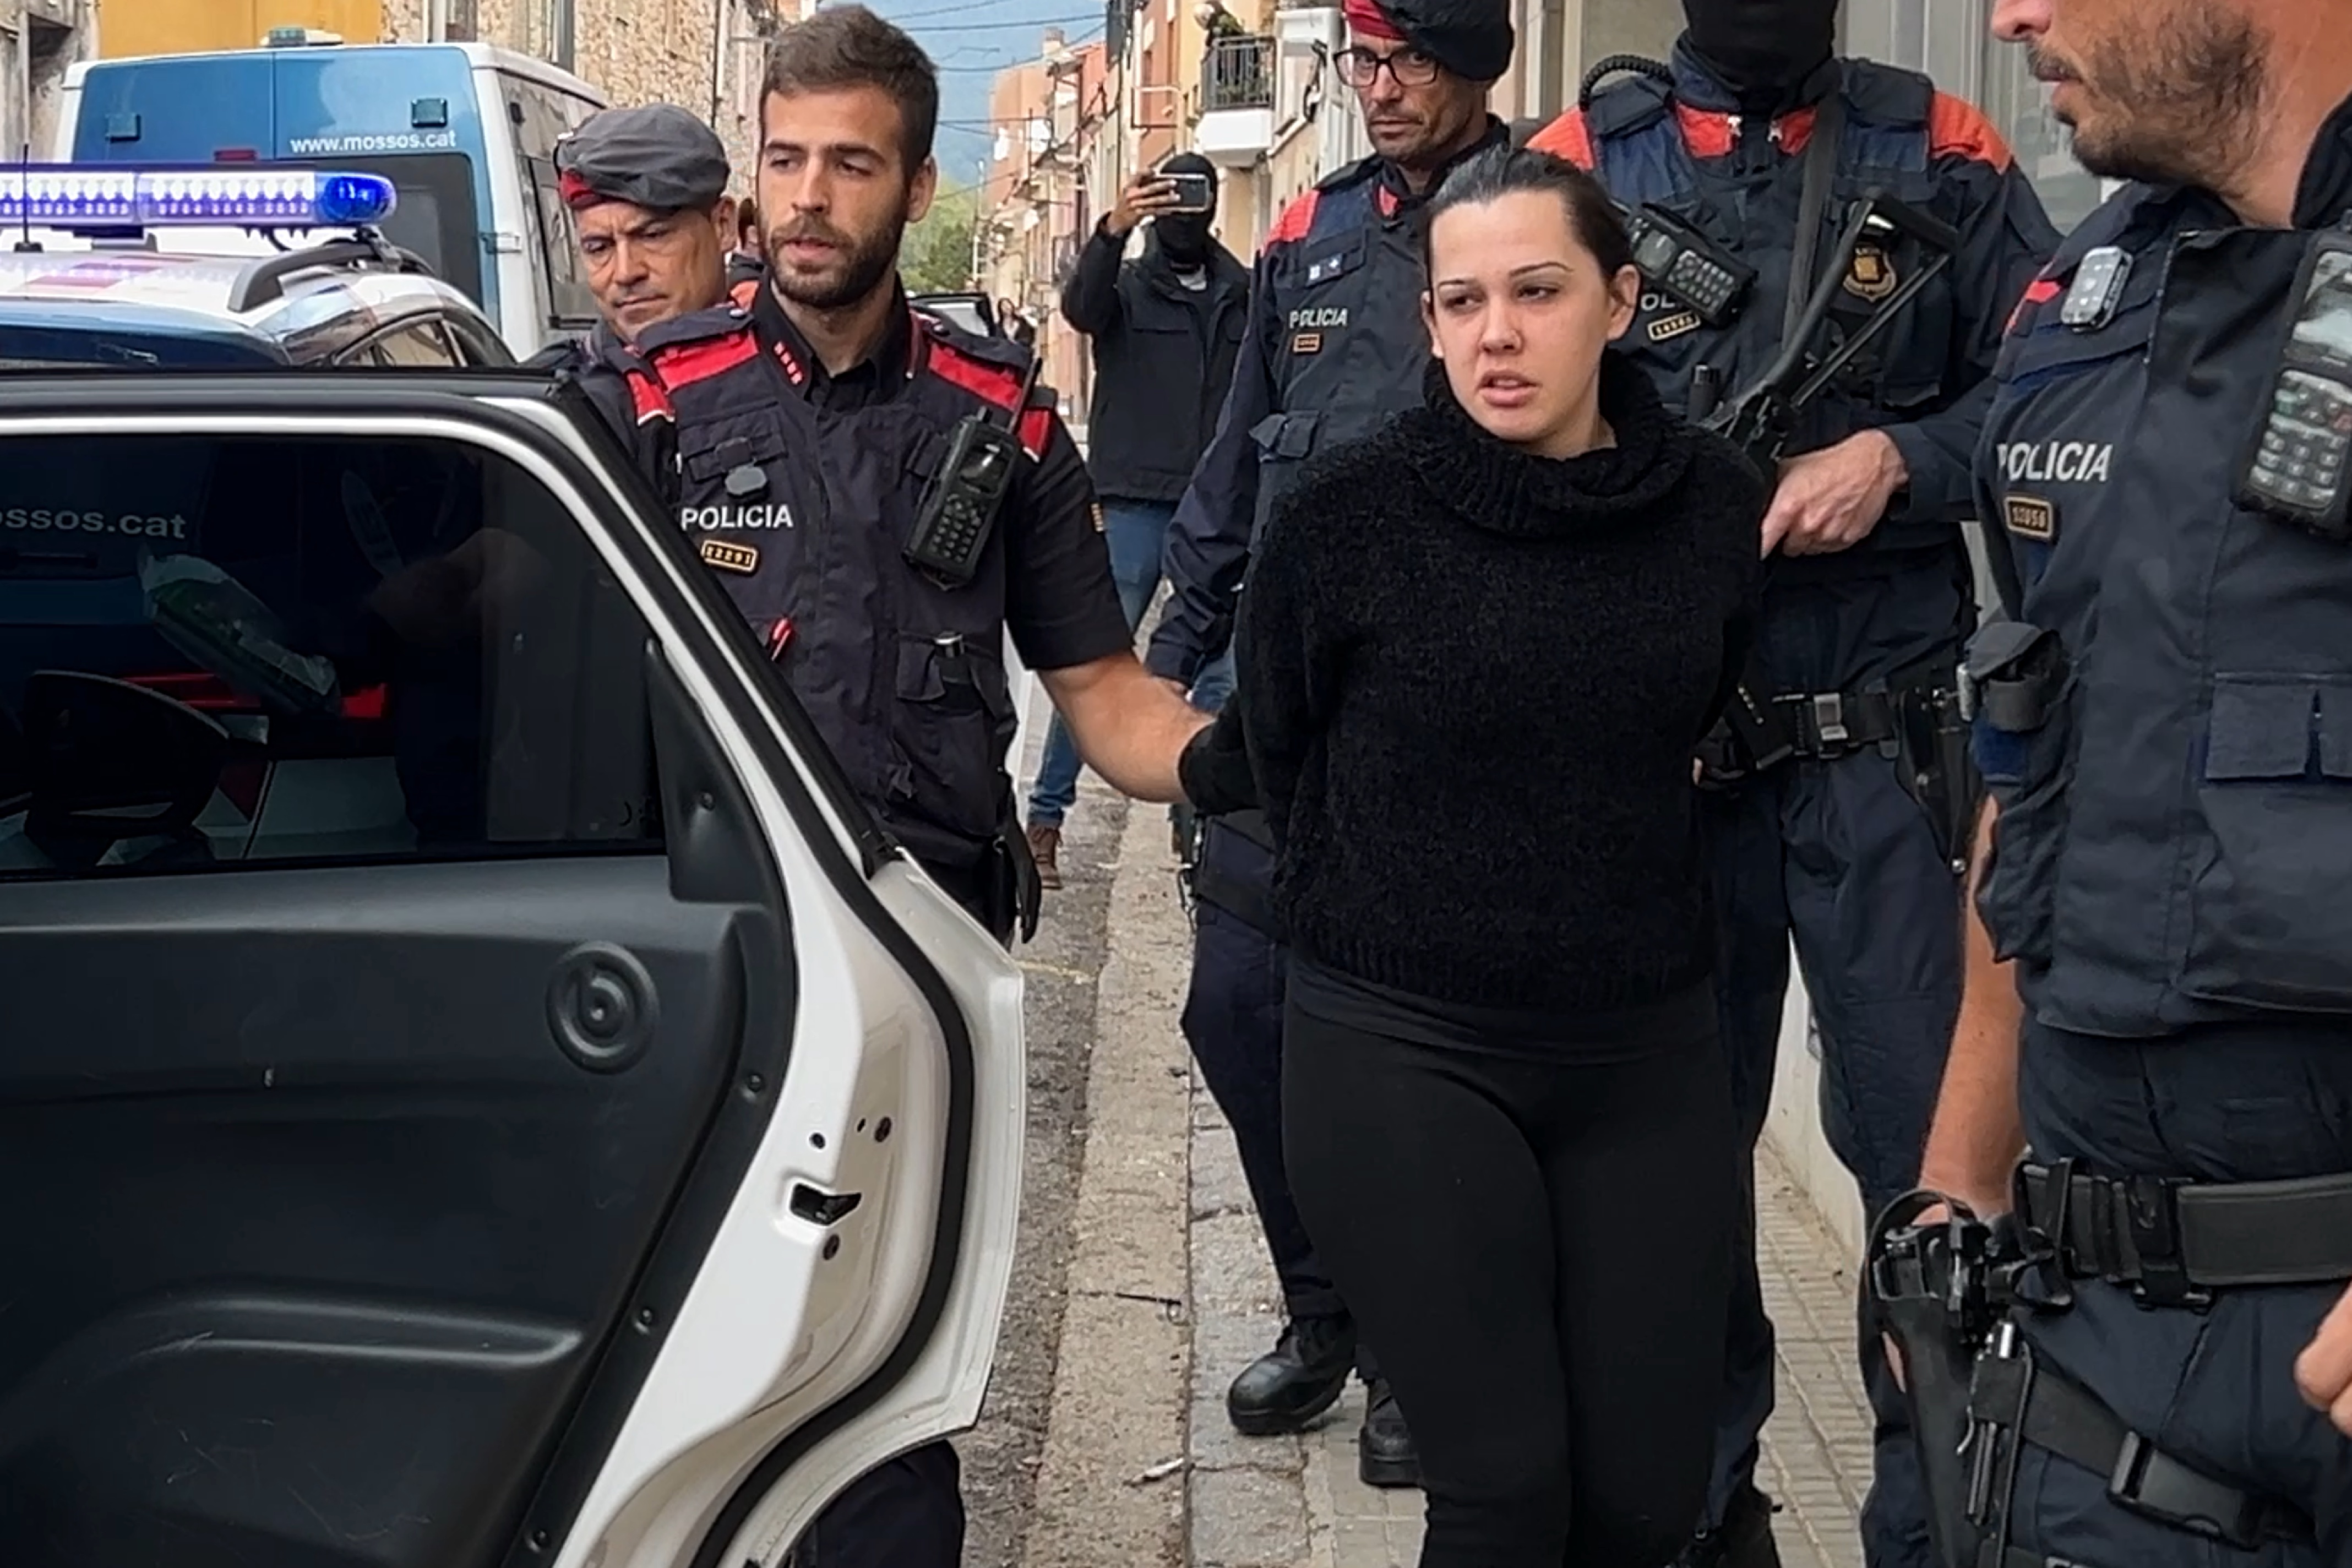 Mossos police escort a woman arrested in Sentmenat over Combat 18 links